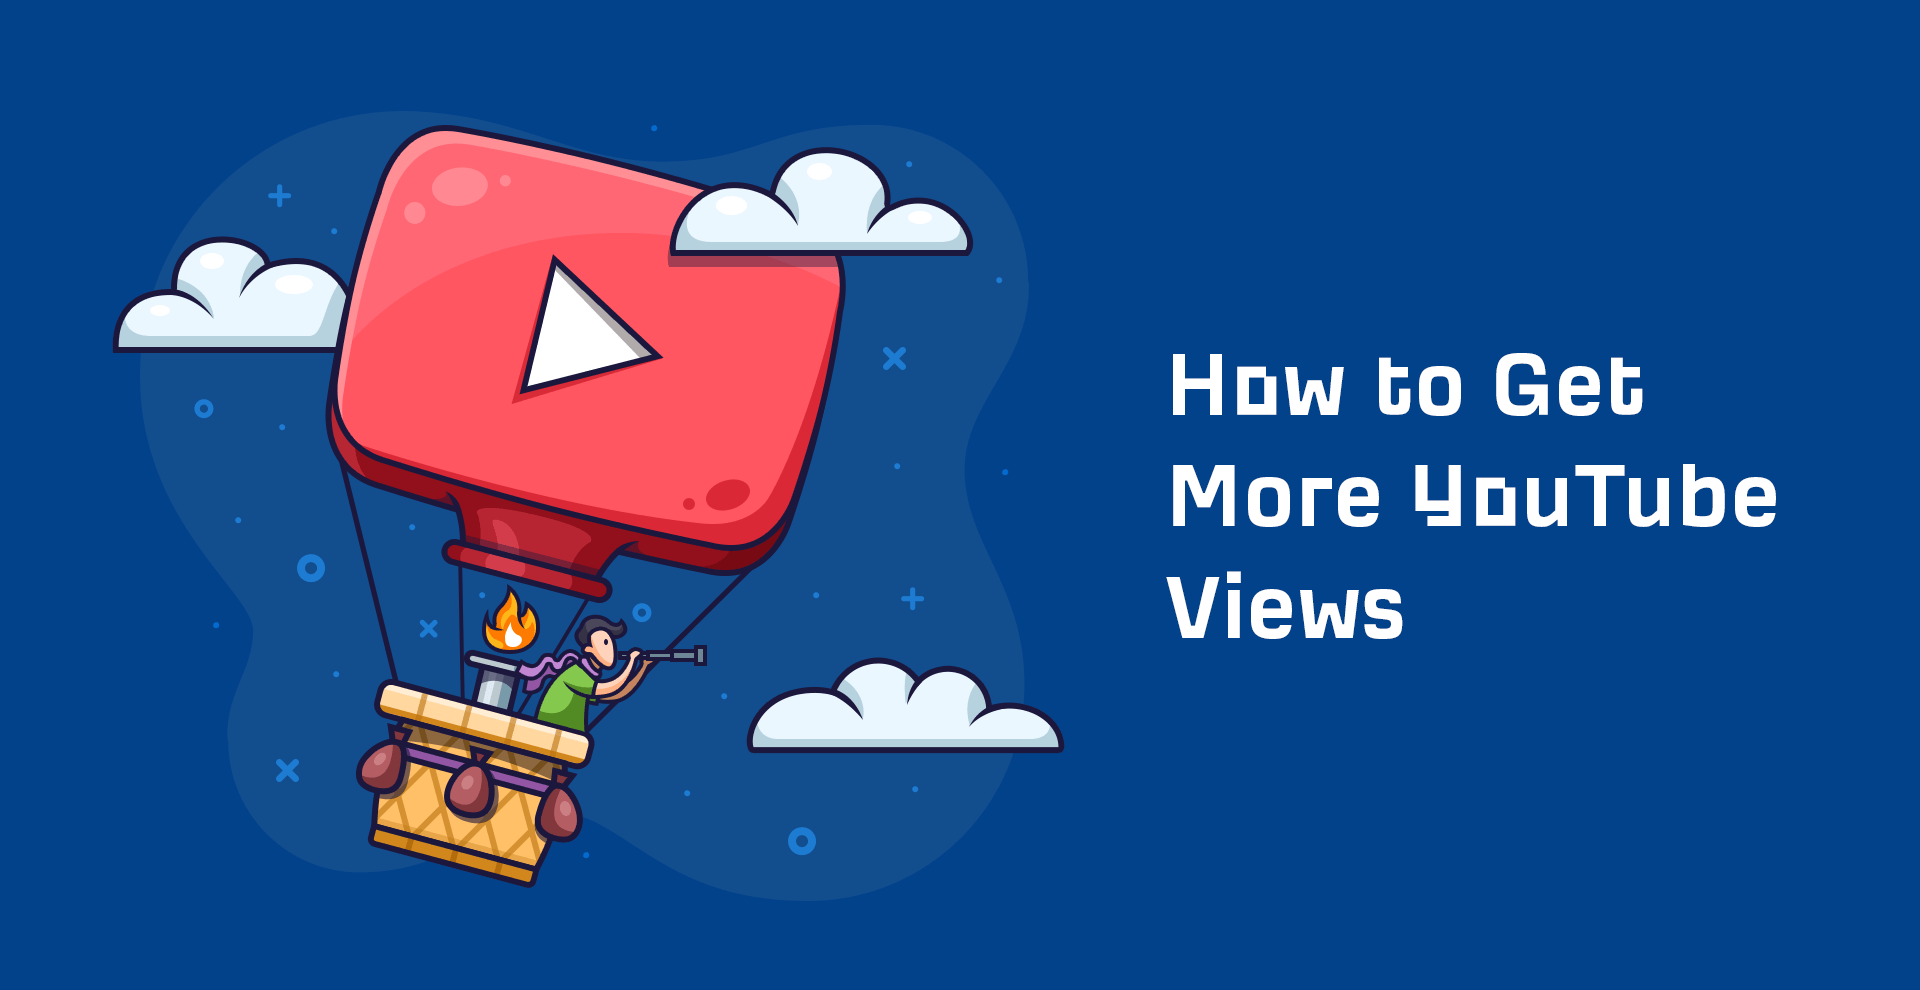 10 Ways to Get More YouTube Views